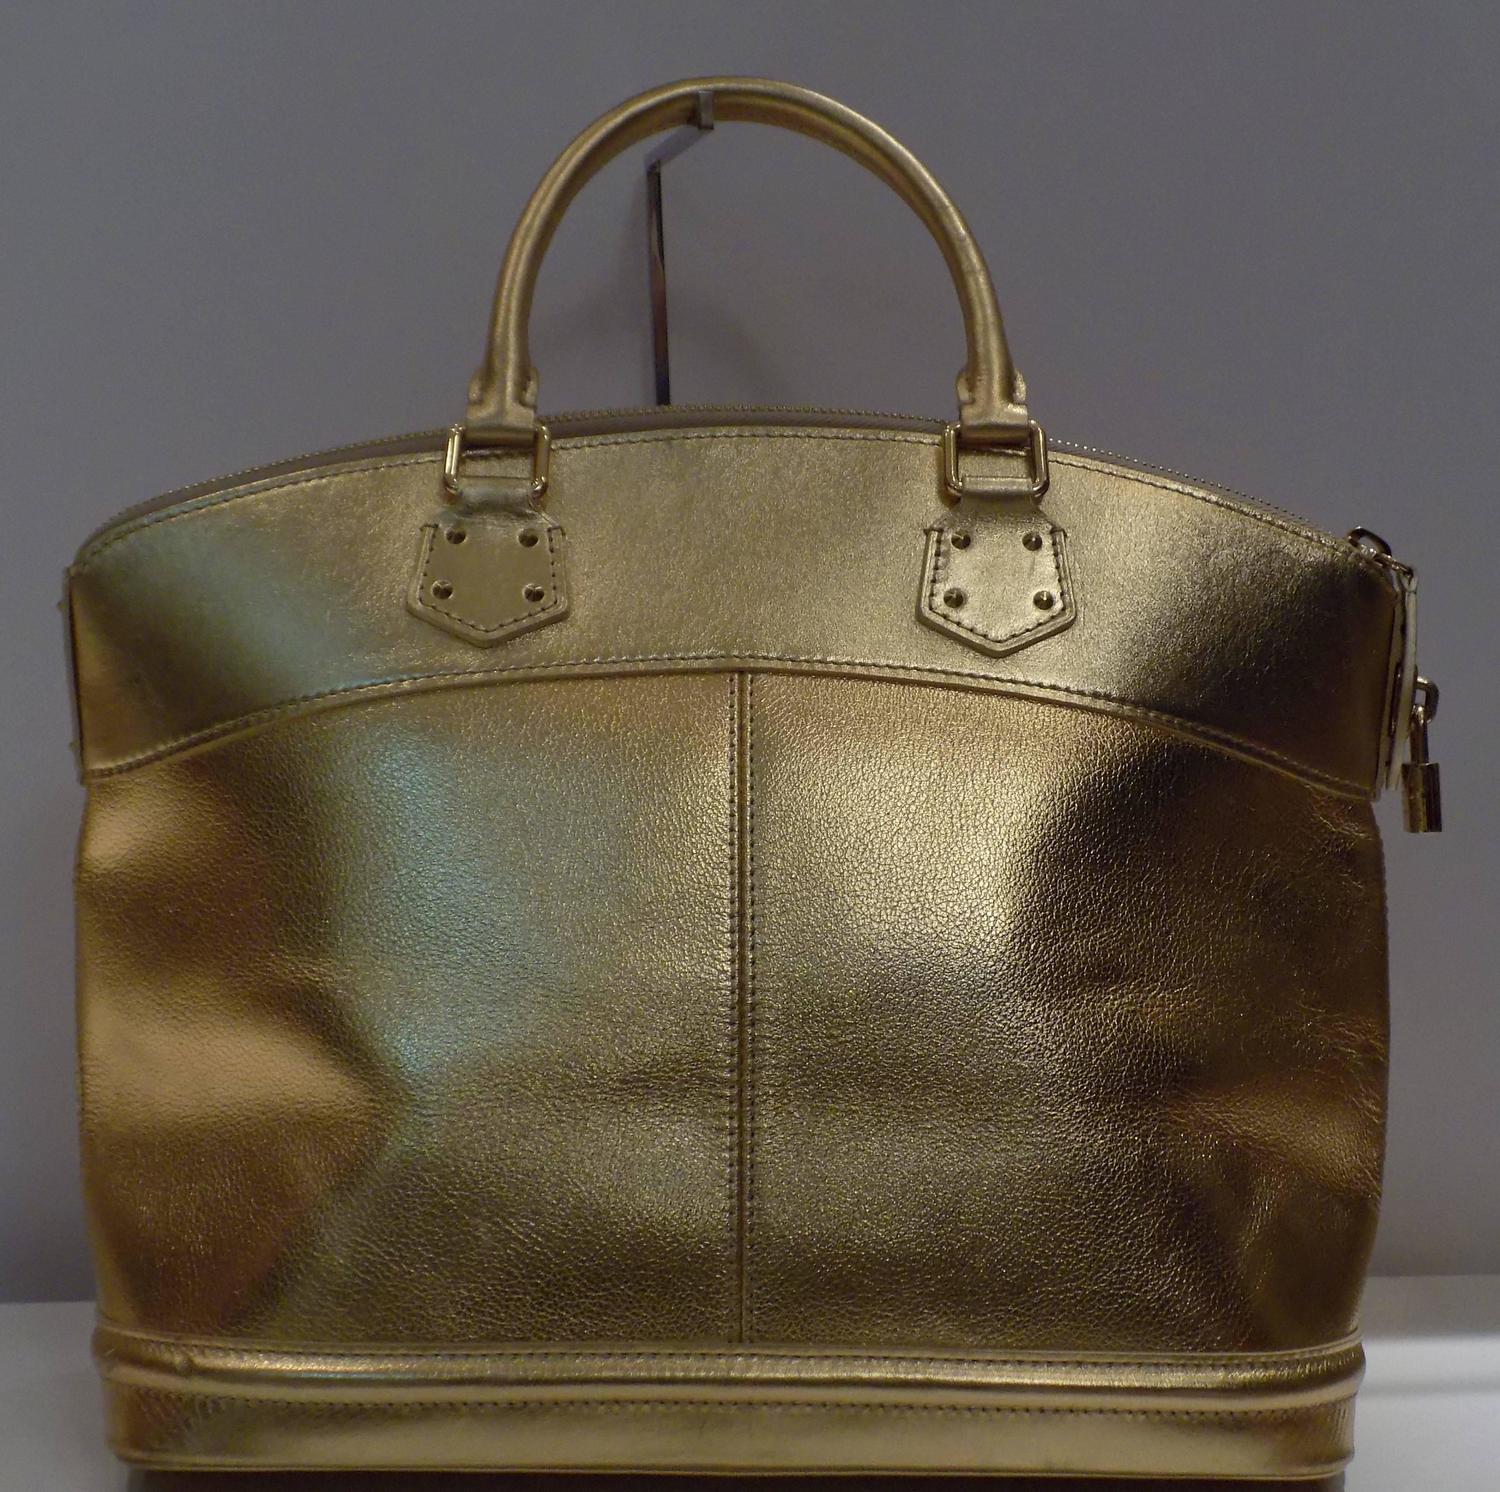 Louis Vuitton Suhali Gold Bag For Sale at 1stdibs